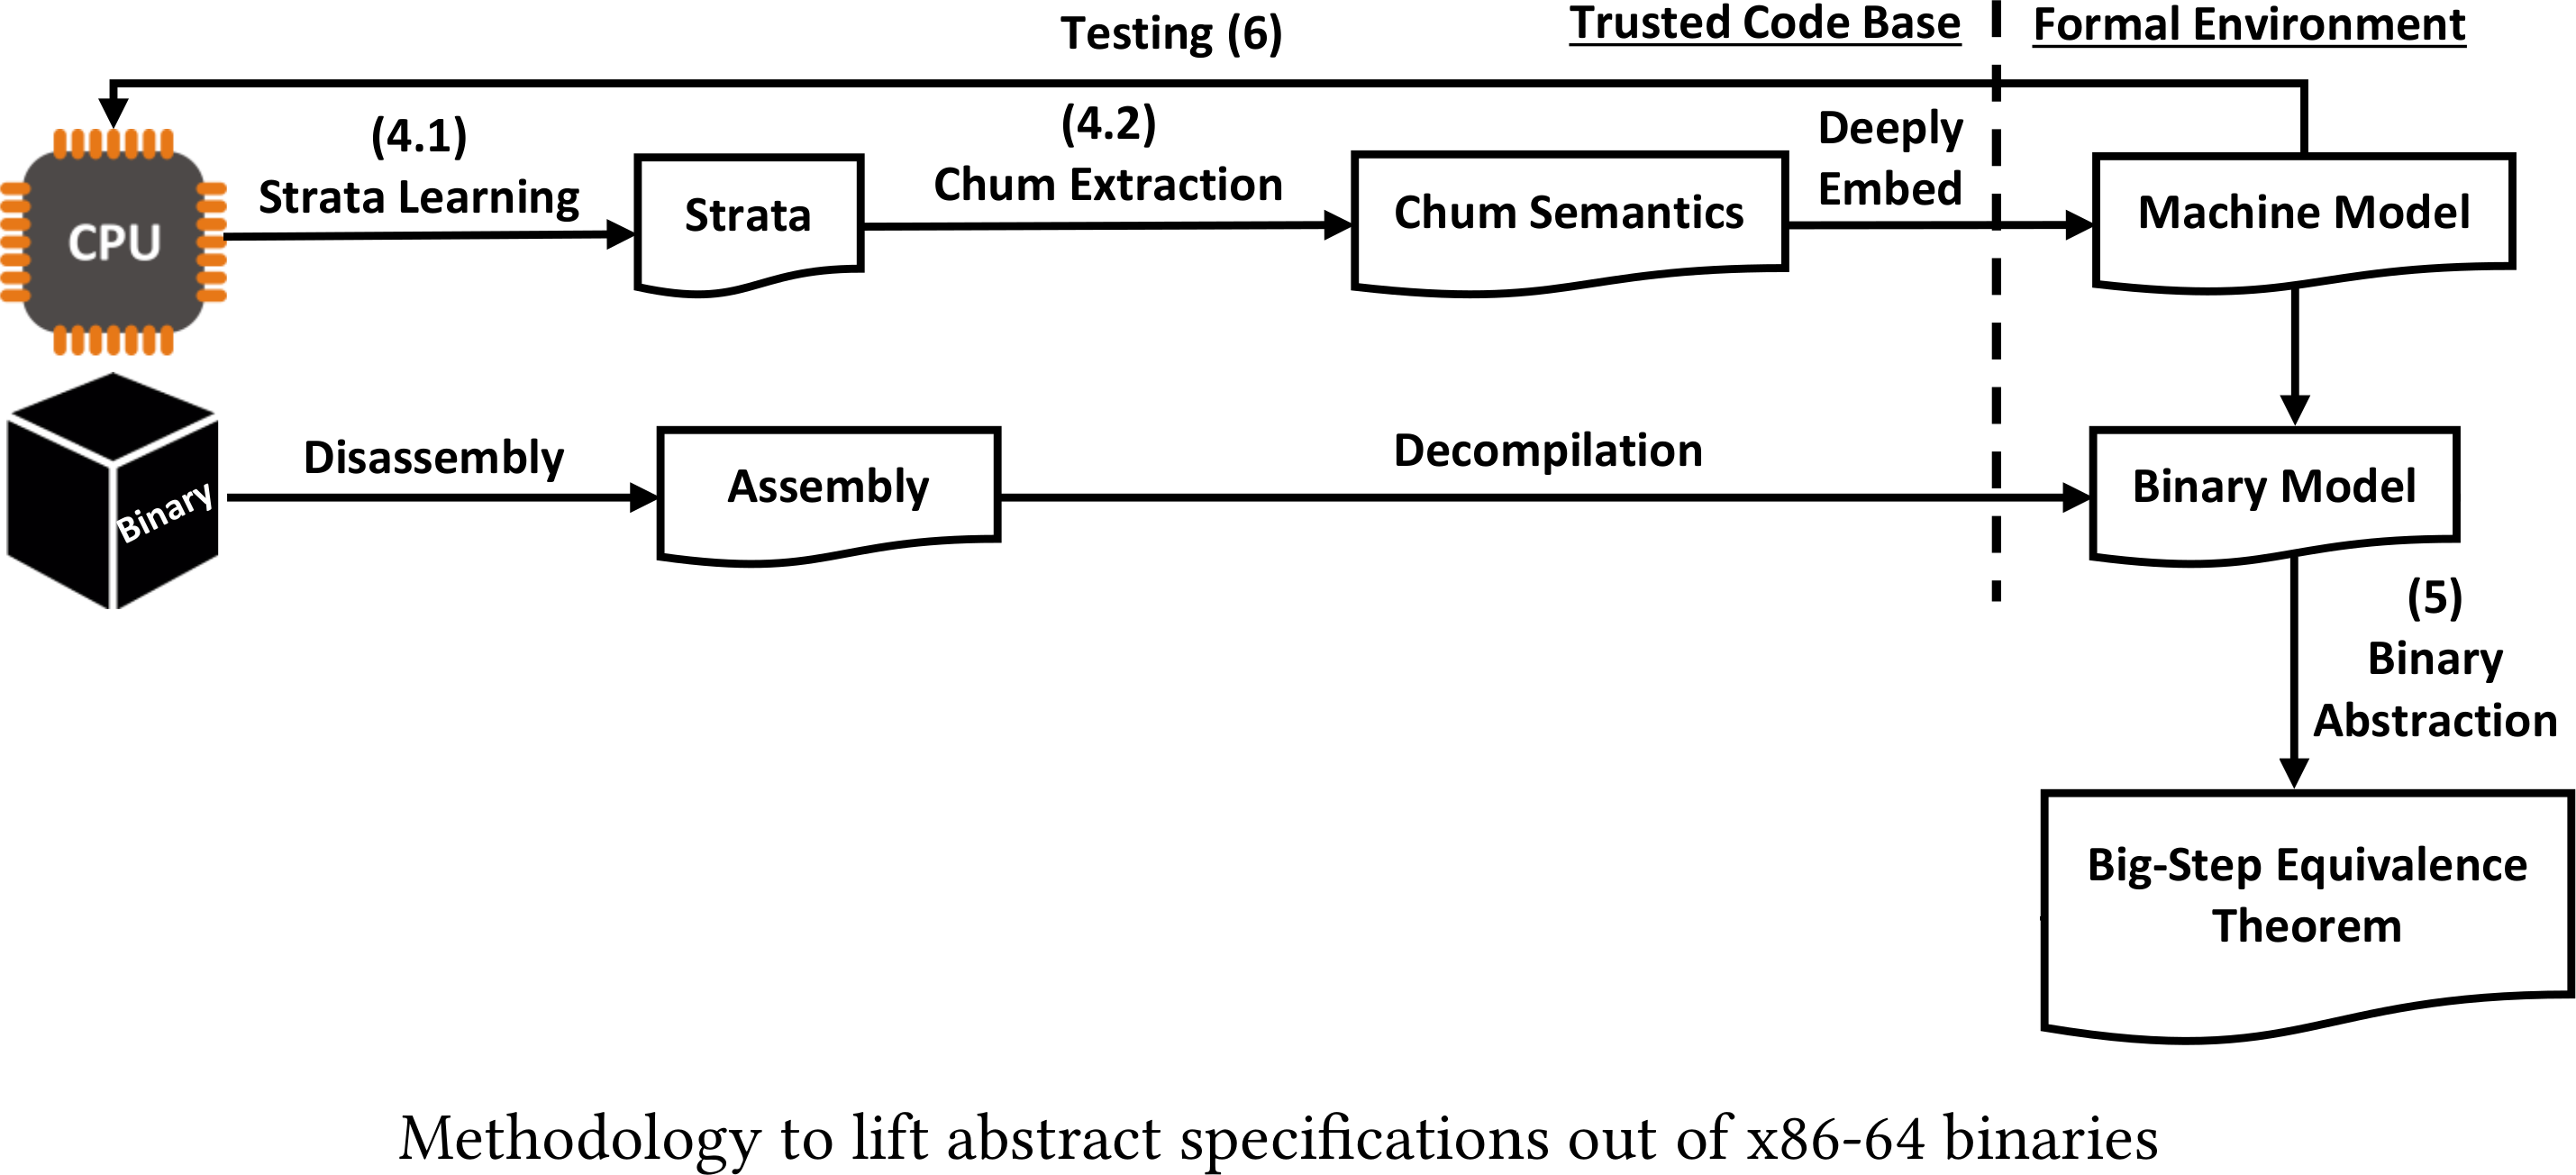 Visual depiction of the methodology to lift abstract specifications of x86-64 binaries